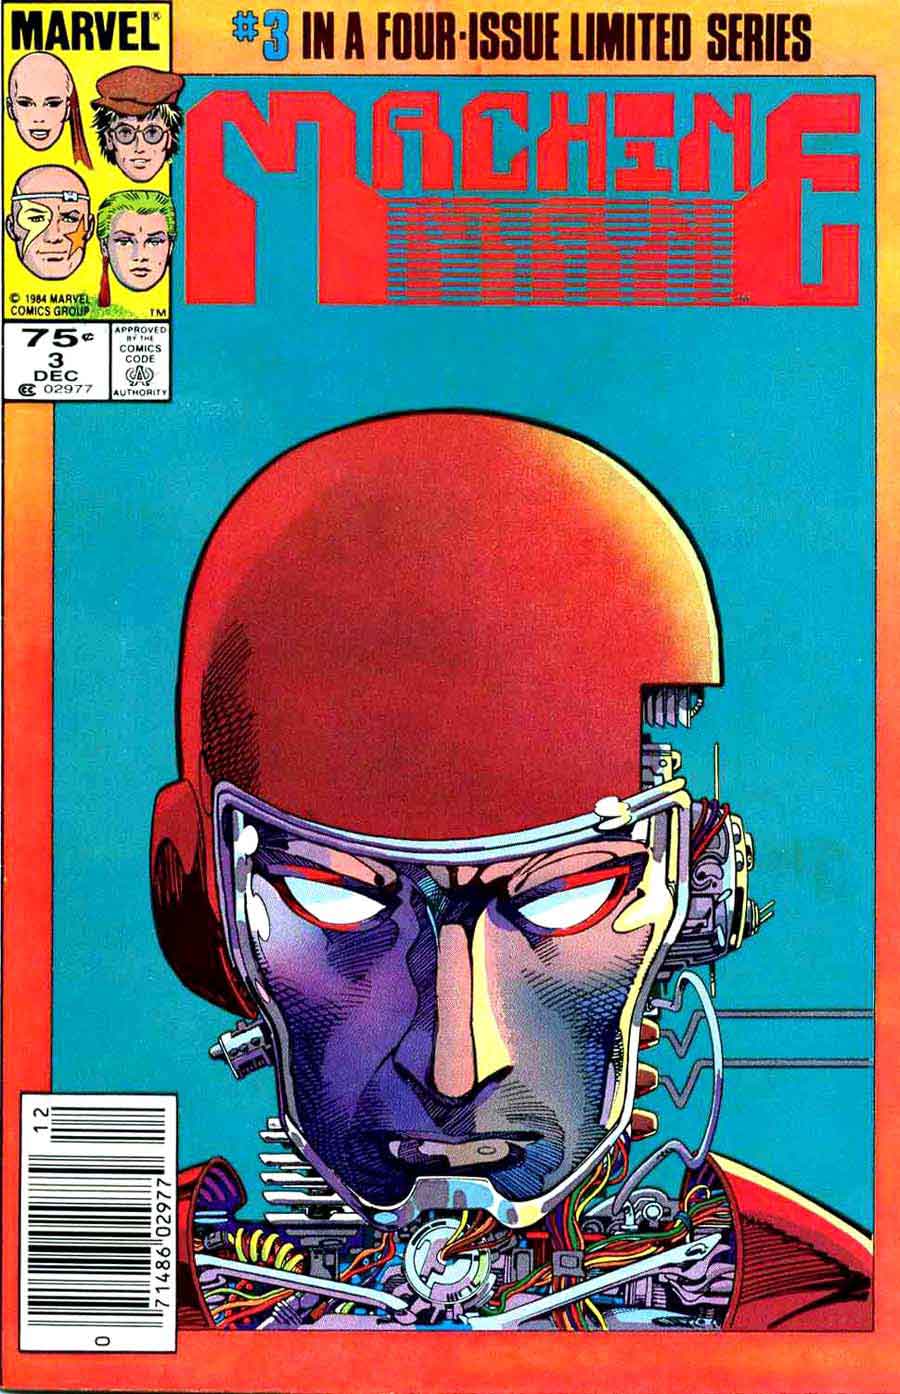 Machine Man v2 #3 marvel 1980s comic book cover art by Barry Windsor Smith